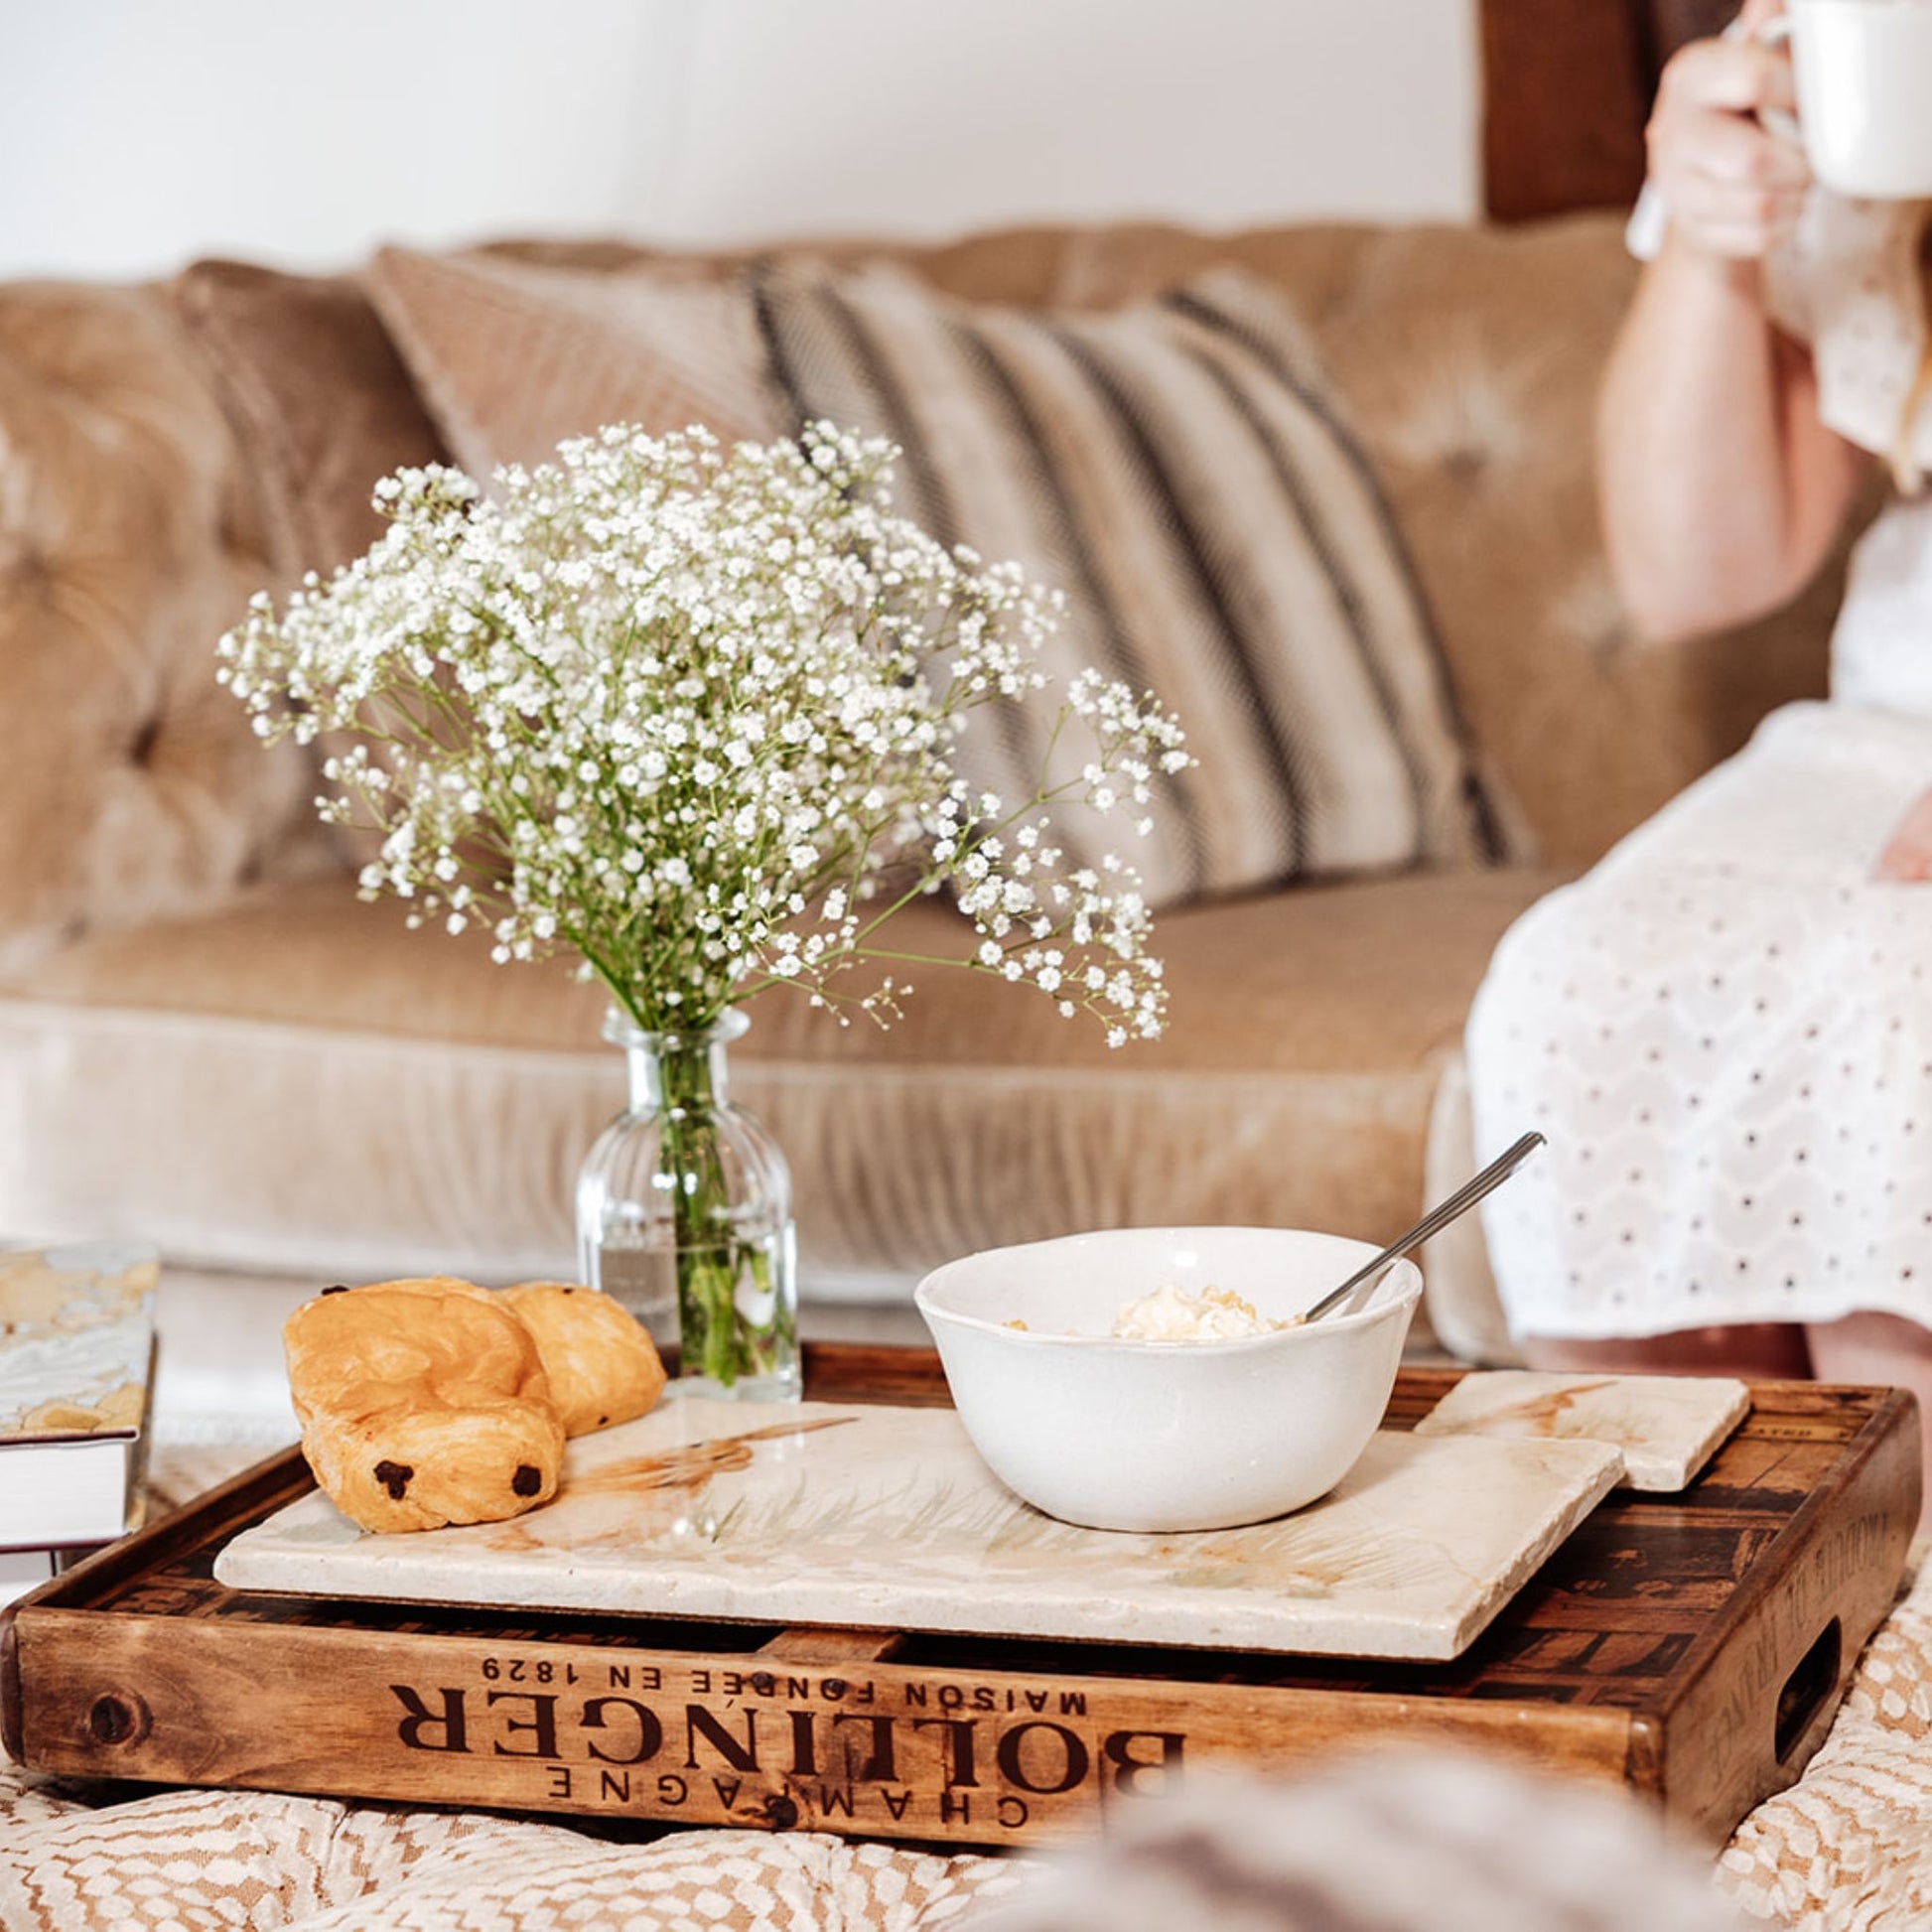 A cosy farmhouse interior, with the focus on a cream marble sharing platter with breakfast pastries and a cereal bowl resting on it. The platter has a watercolour design featuring a hare washing his ear.